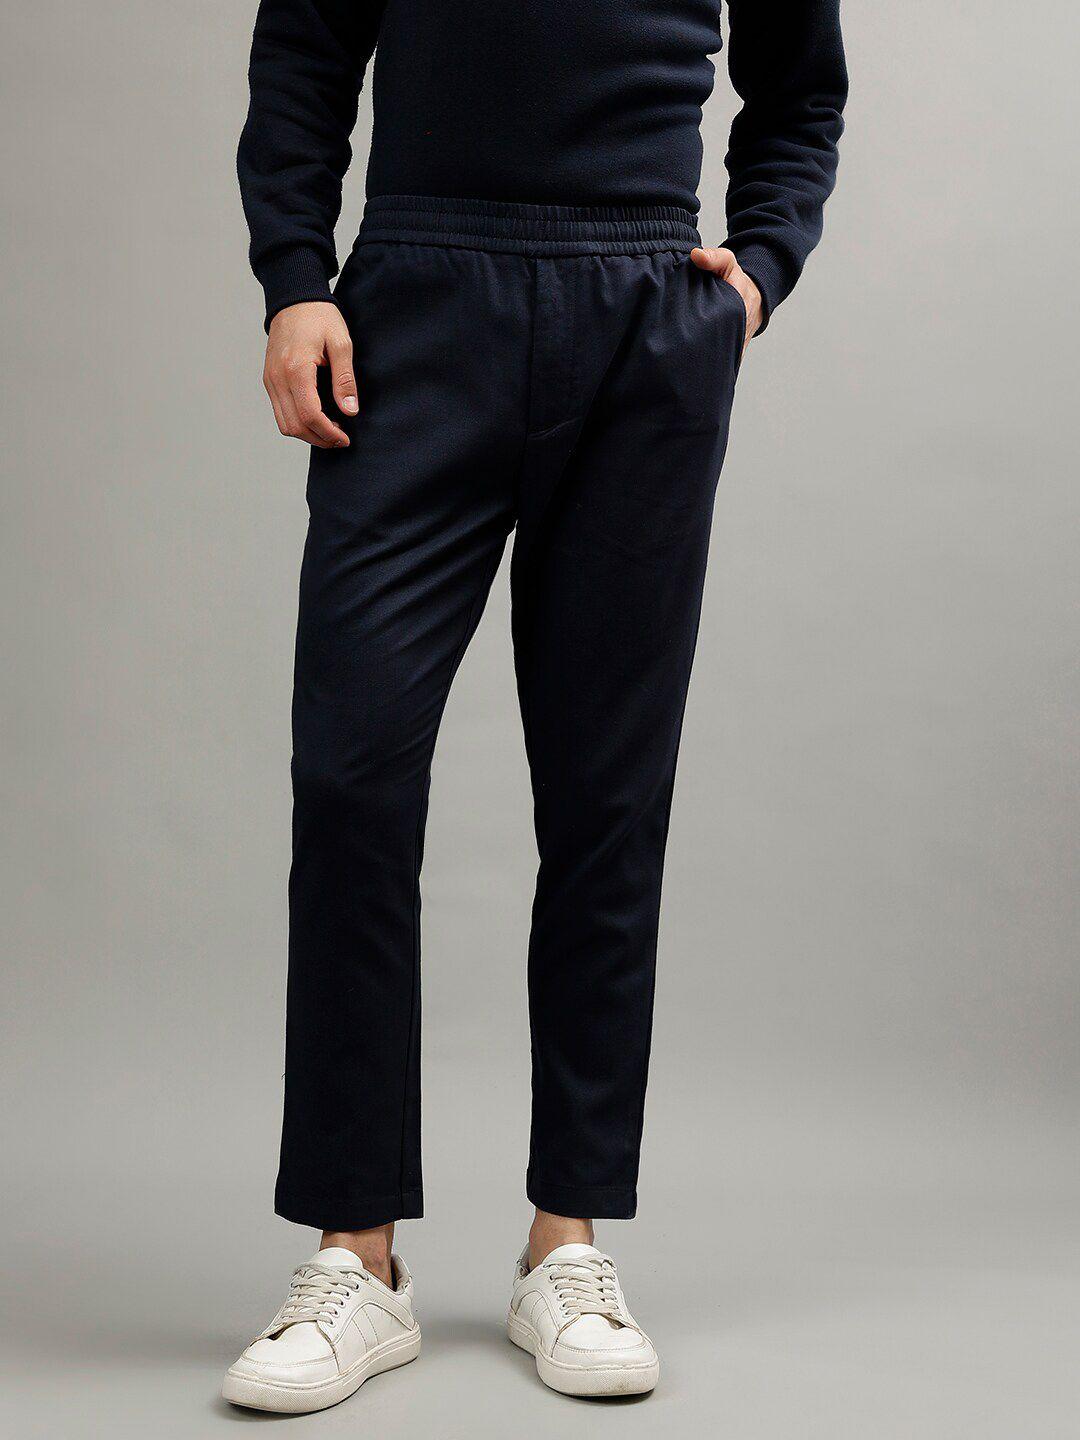 iconic-men-mid-rise-slim-fit-cotton-chinos-casual-trousers